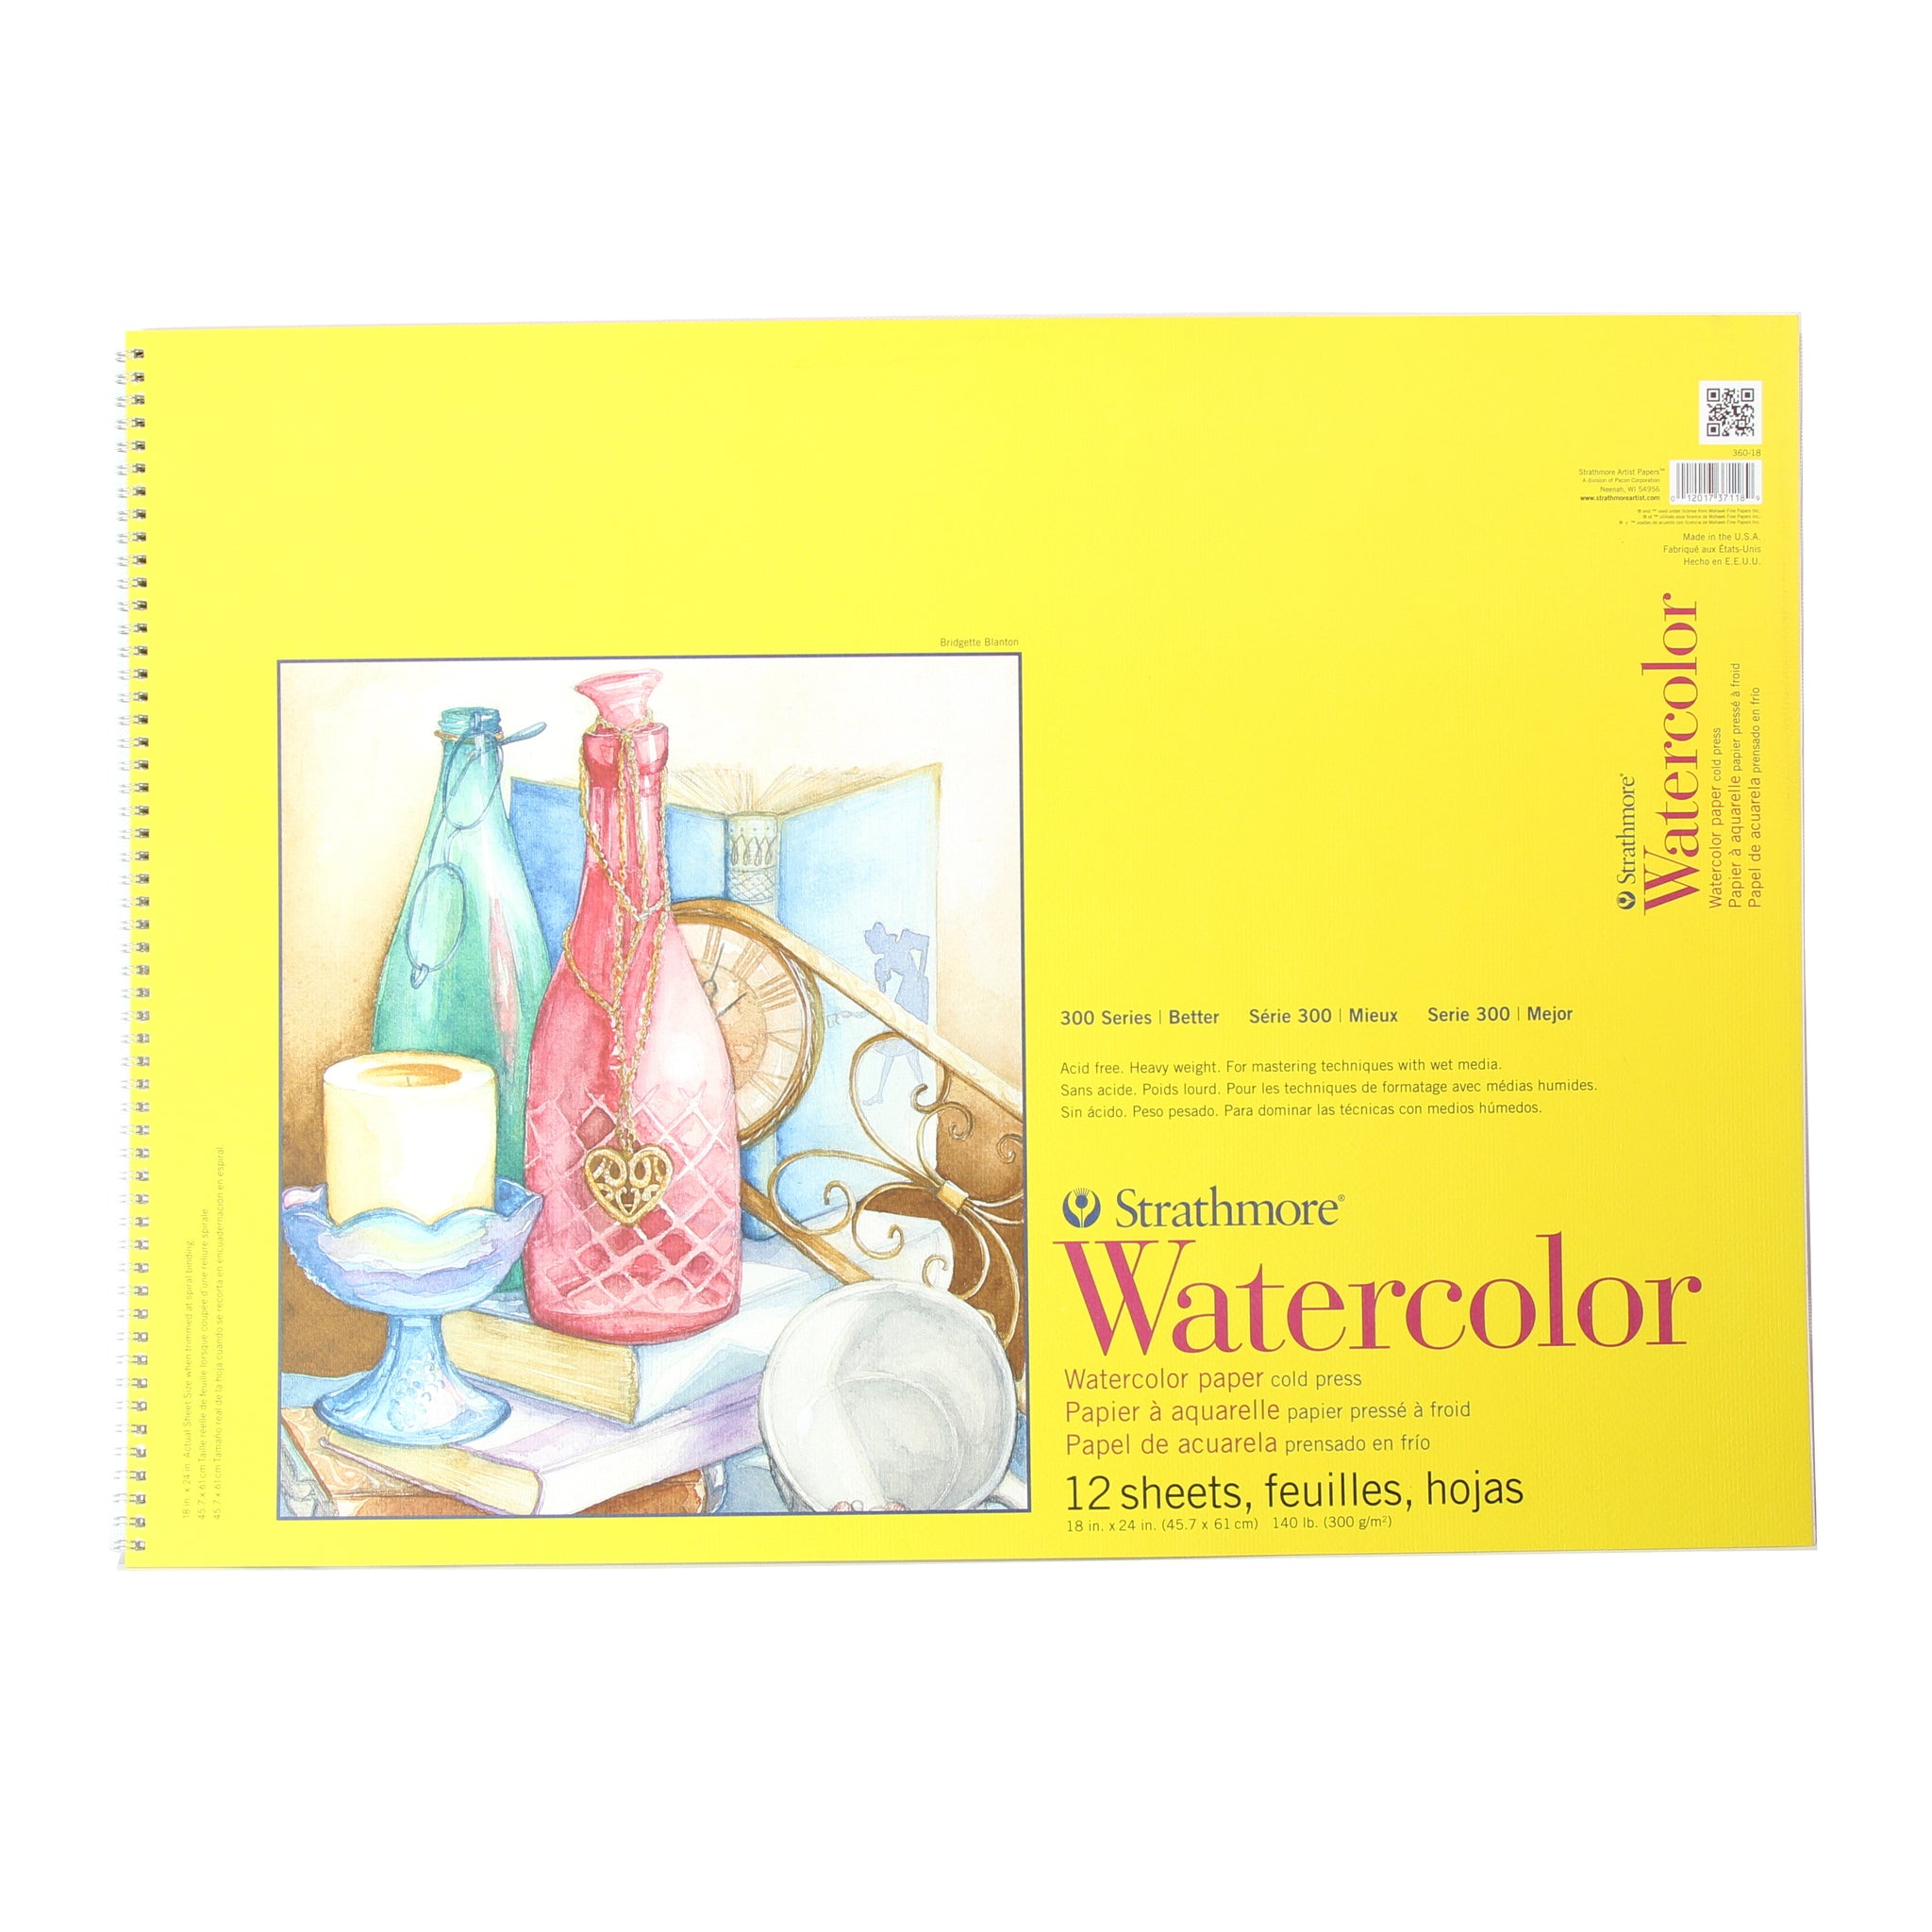 300 Series Colored Art - Strathmore Artist Papers